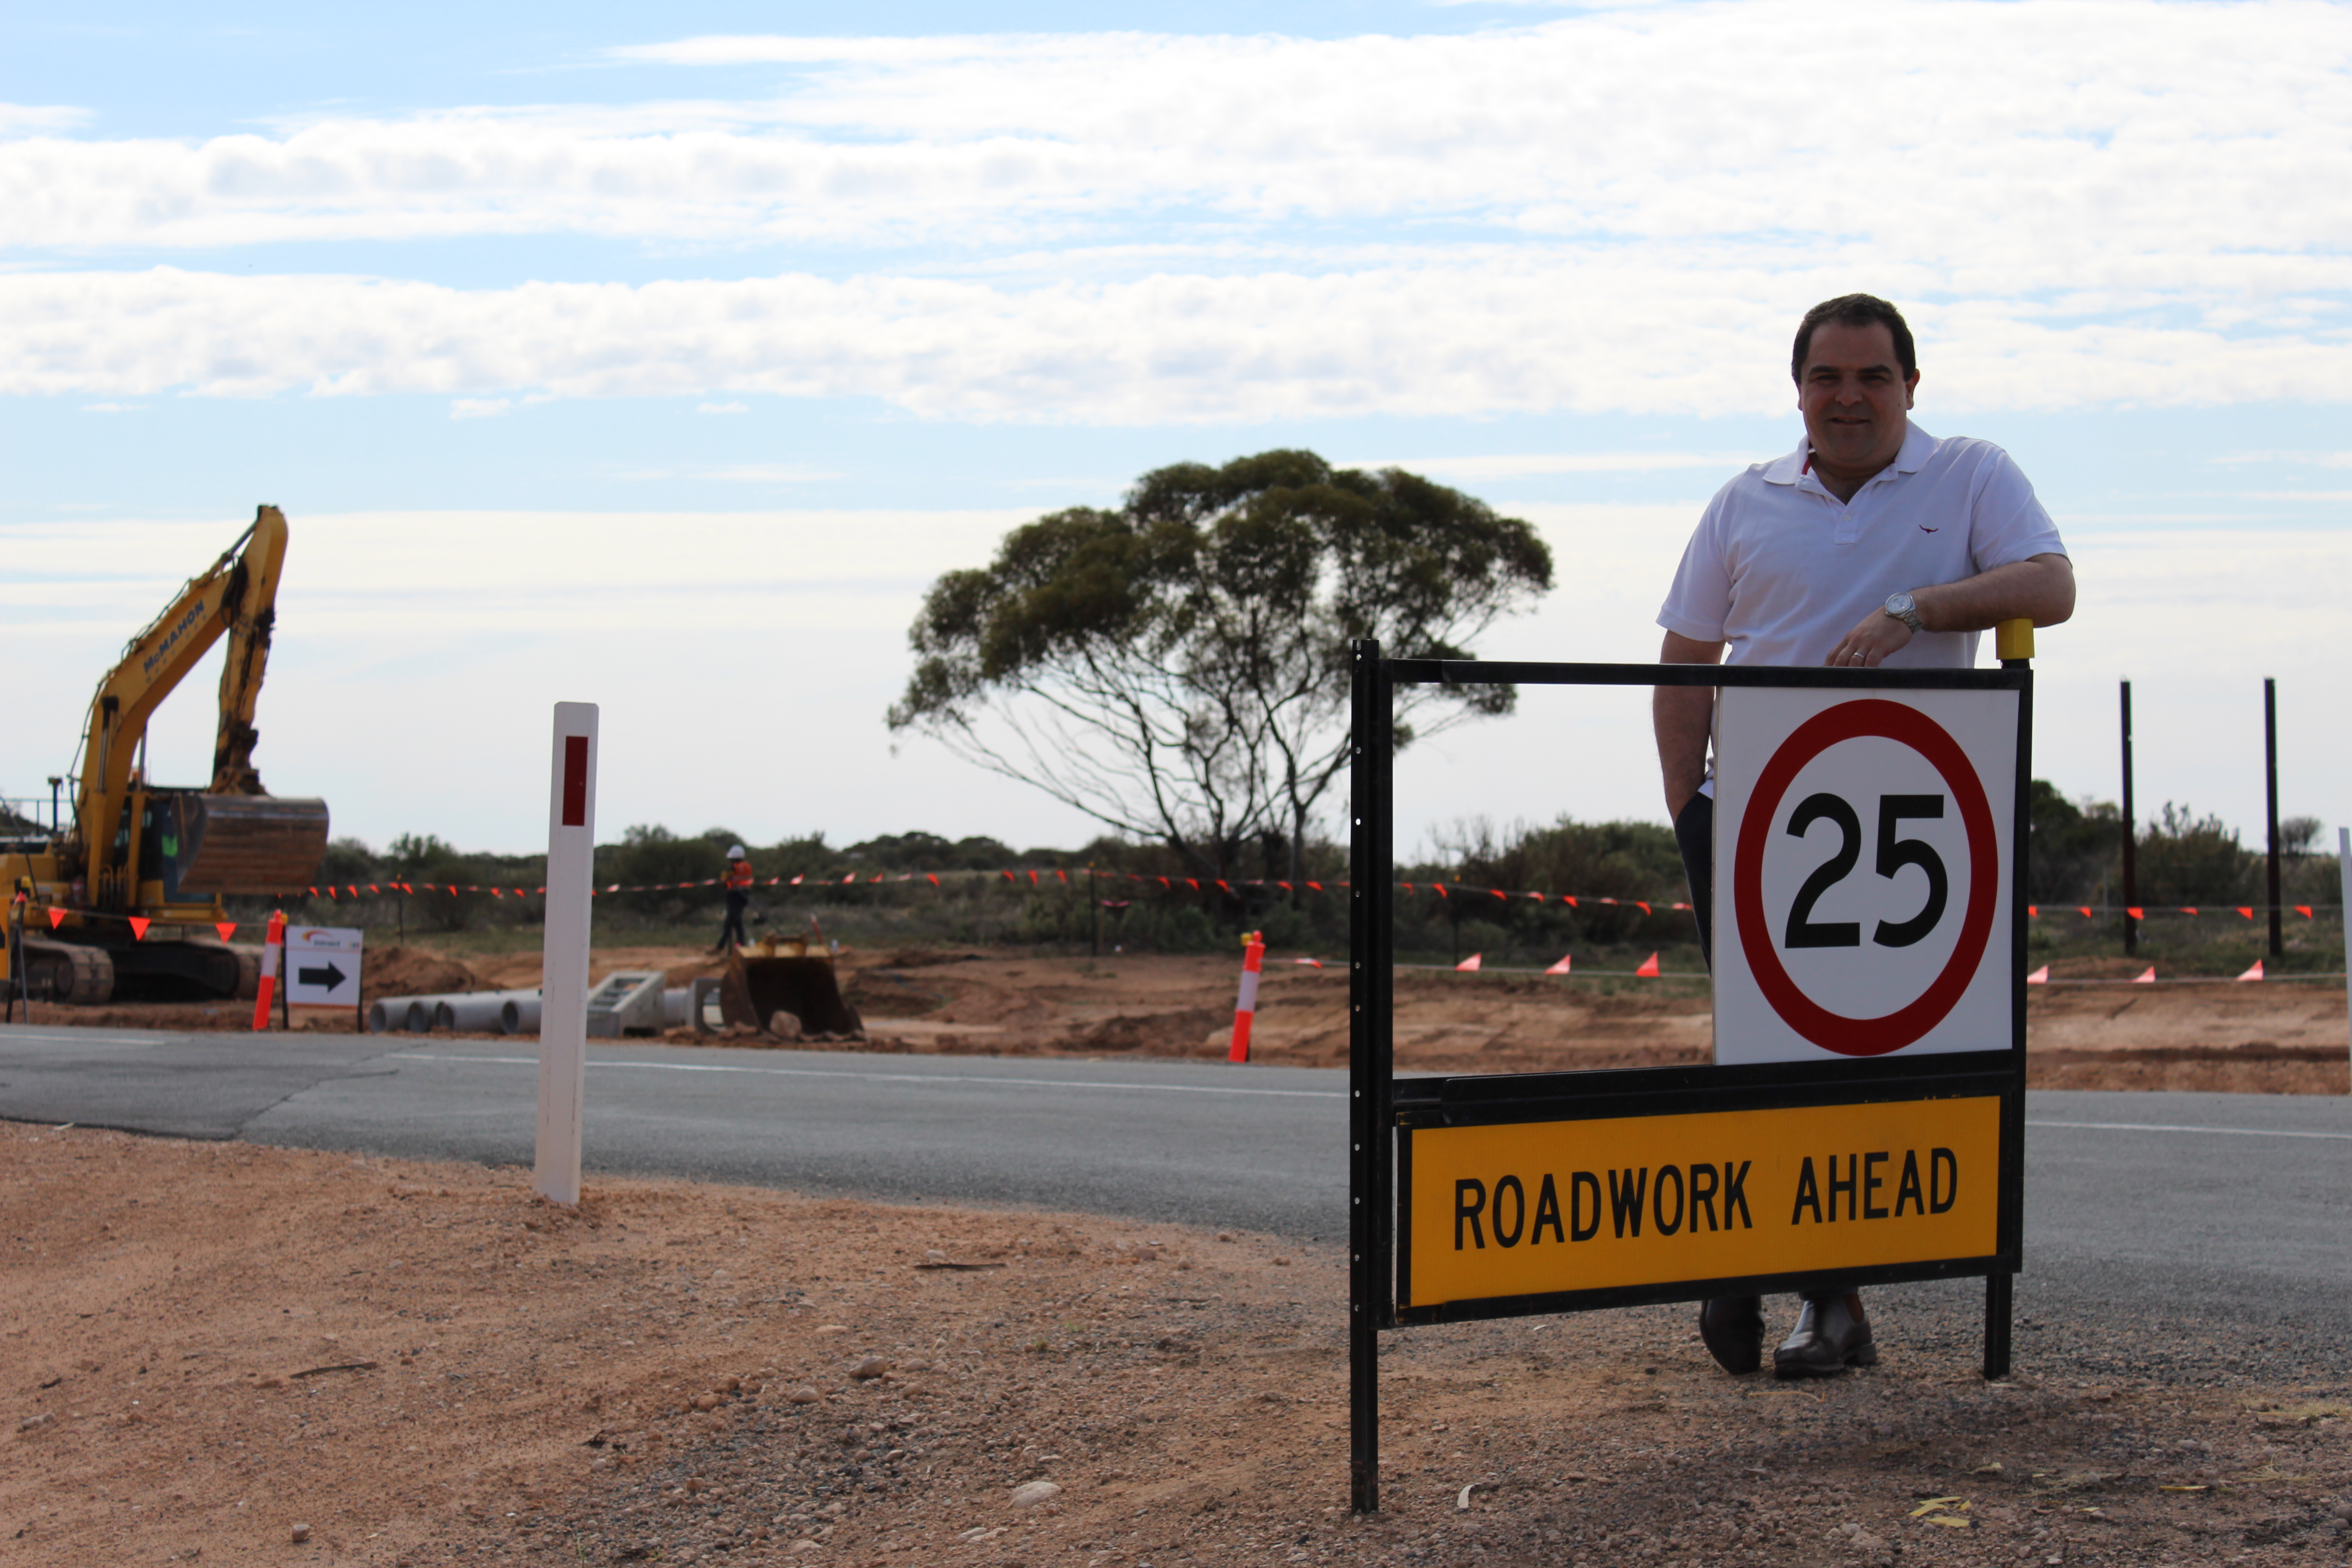 ADDITIONAL FEDERAL FUNDING FOR COUNCILS THROUGH ROADS TO RECOVERY PROGRAM